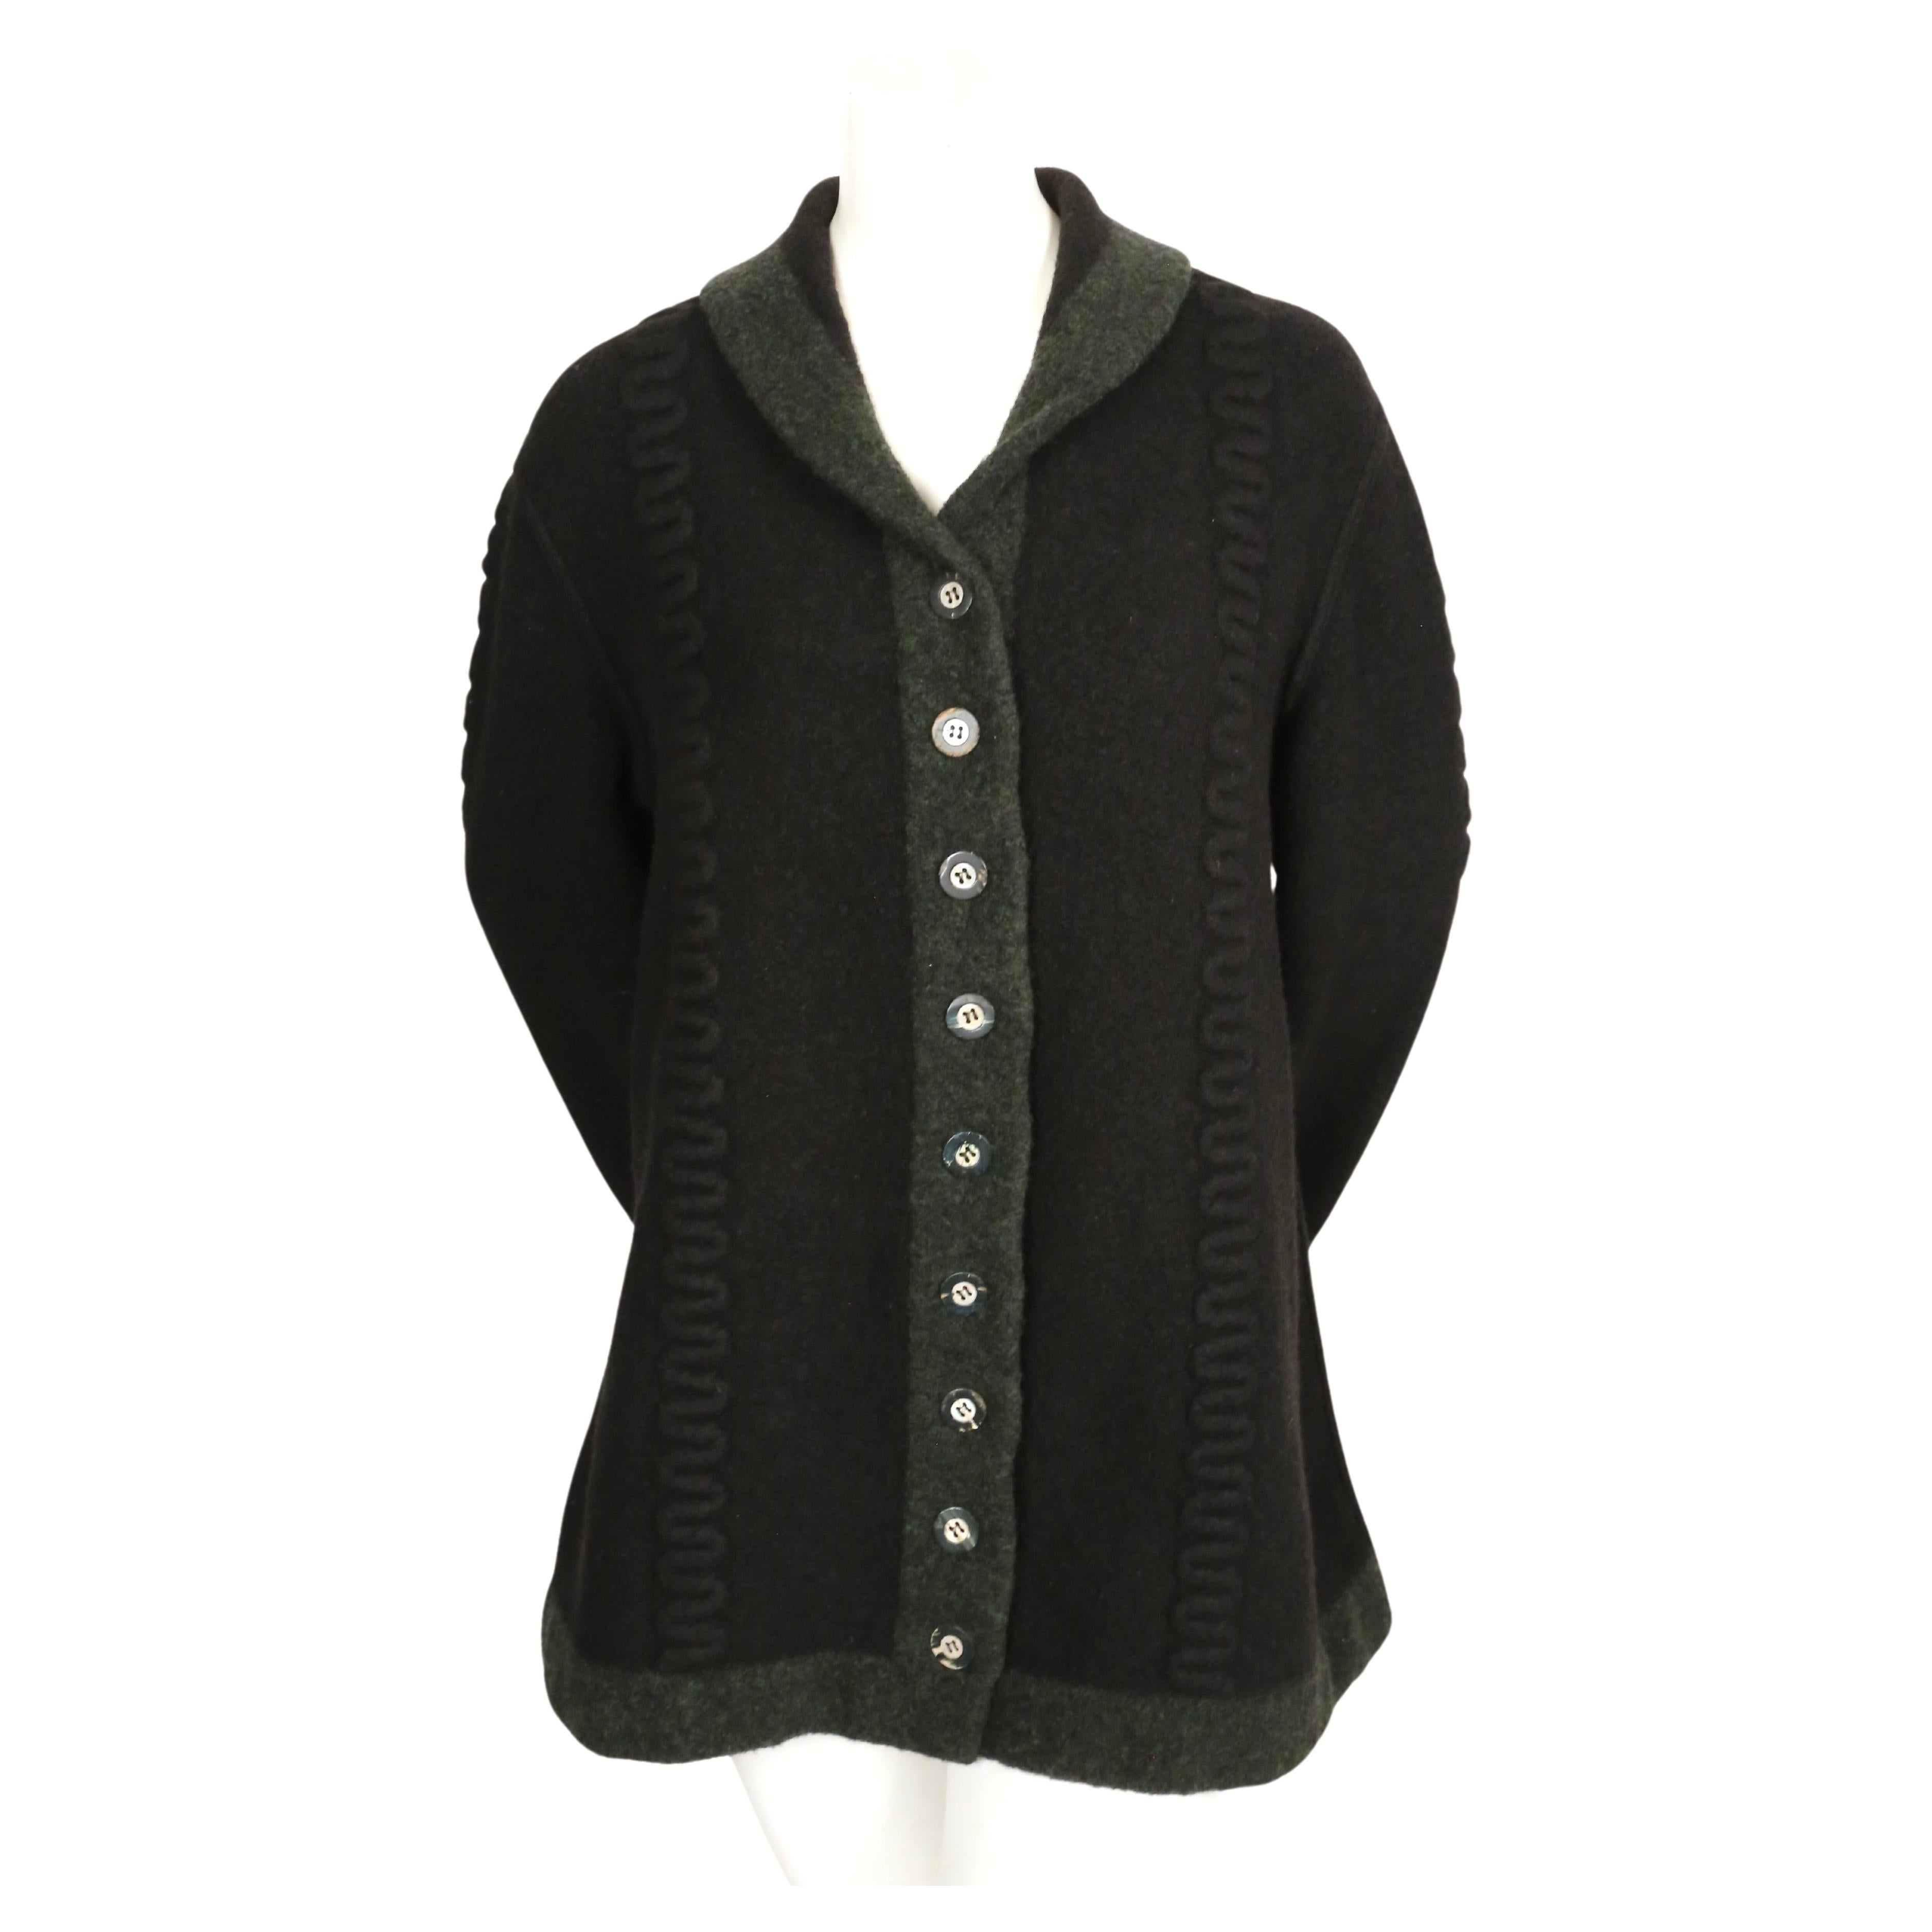 Deep navy-blue and green oversized wool sweater with raised weave and shell buttons designed by Azzedine Alaia dating to fall of 1994. Labeled a size 'S' however this is very oversized so it fits many sizes. Has an A line fit. Approximate